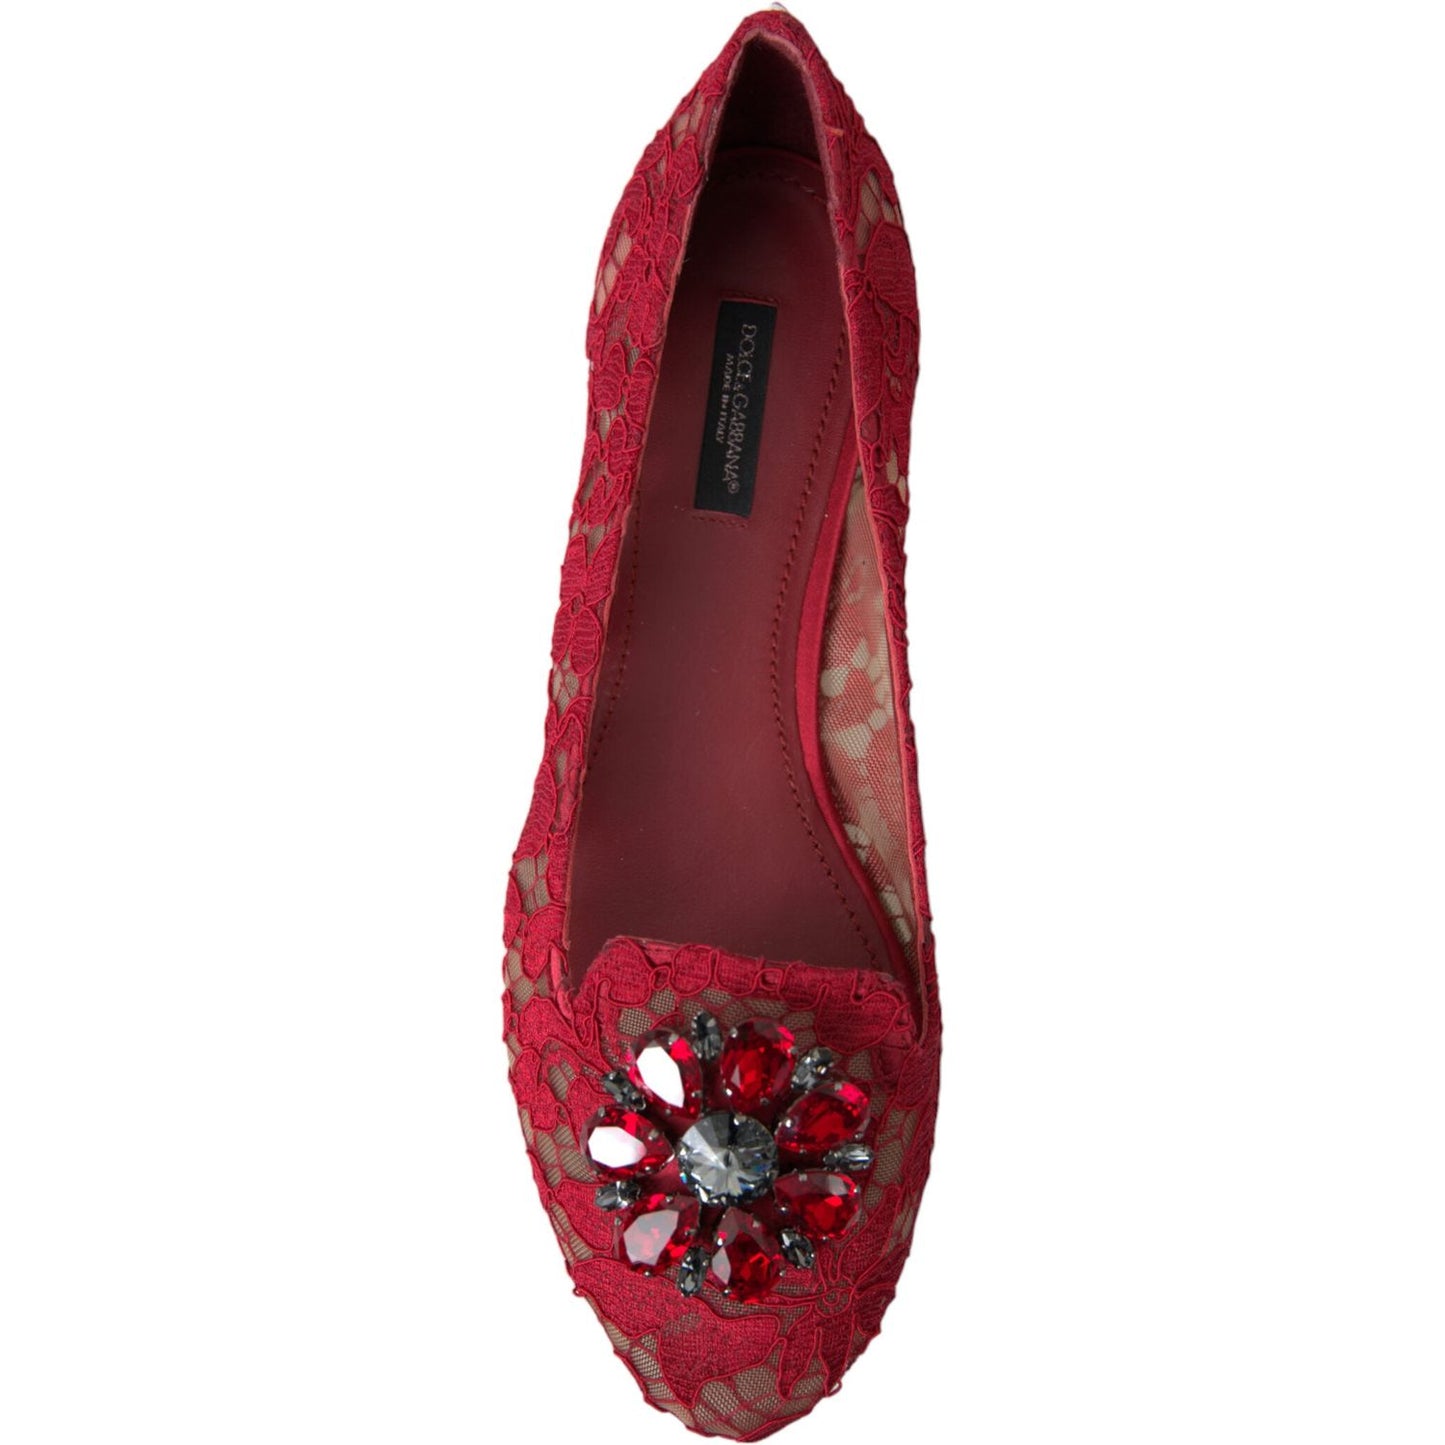 Dolce & Gabbana Elegant Floral Lace Vally Flats red-vally-taormina-lace-crystals-flats-shoes 465A9059-bg-scaled-482b006a-2ea.jpg